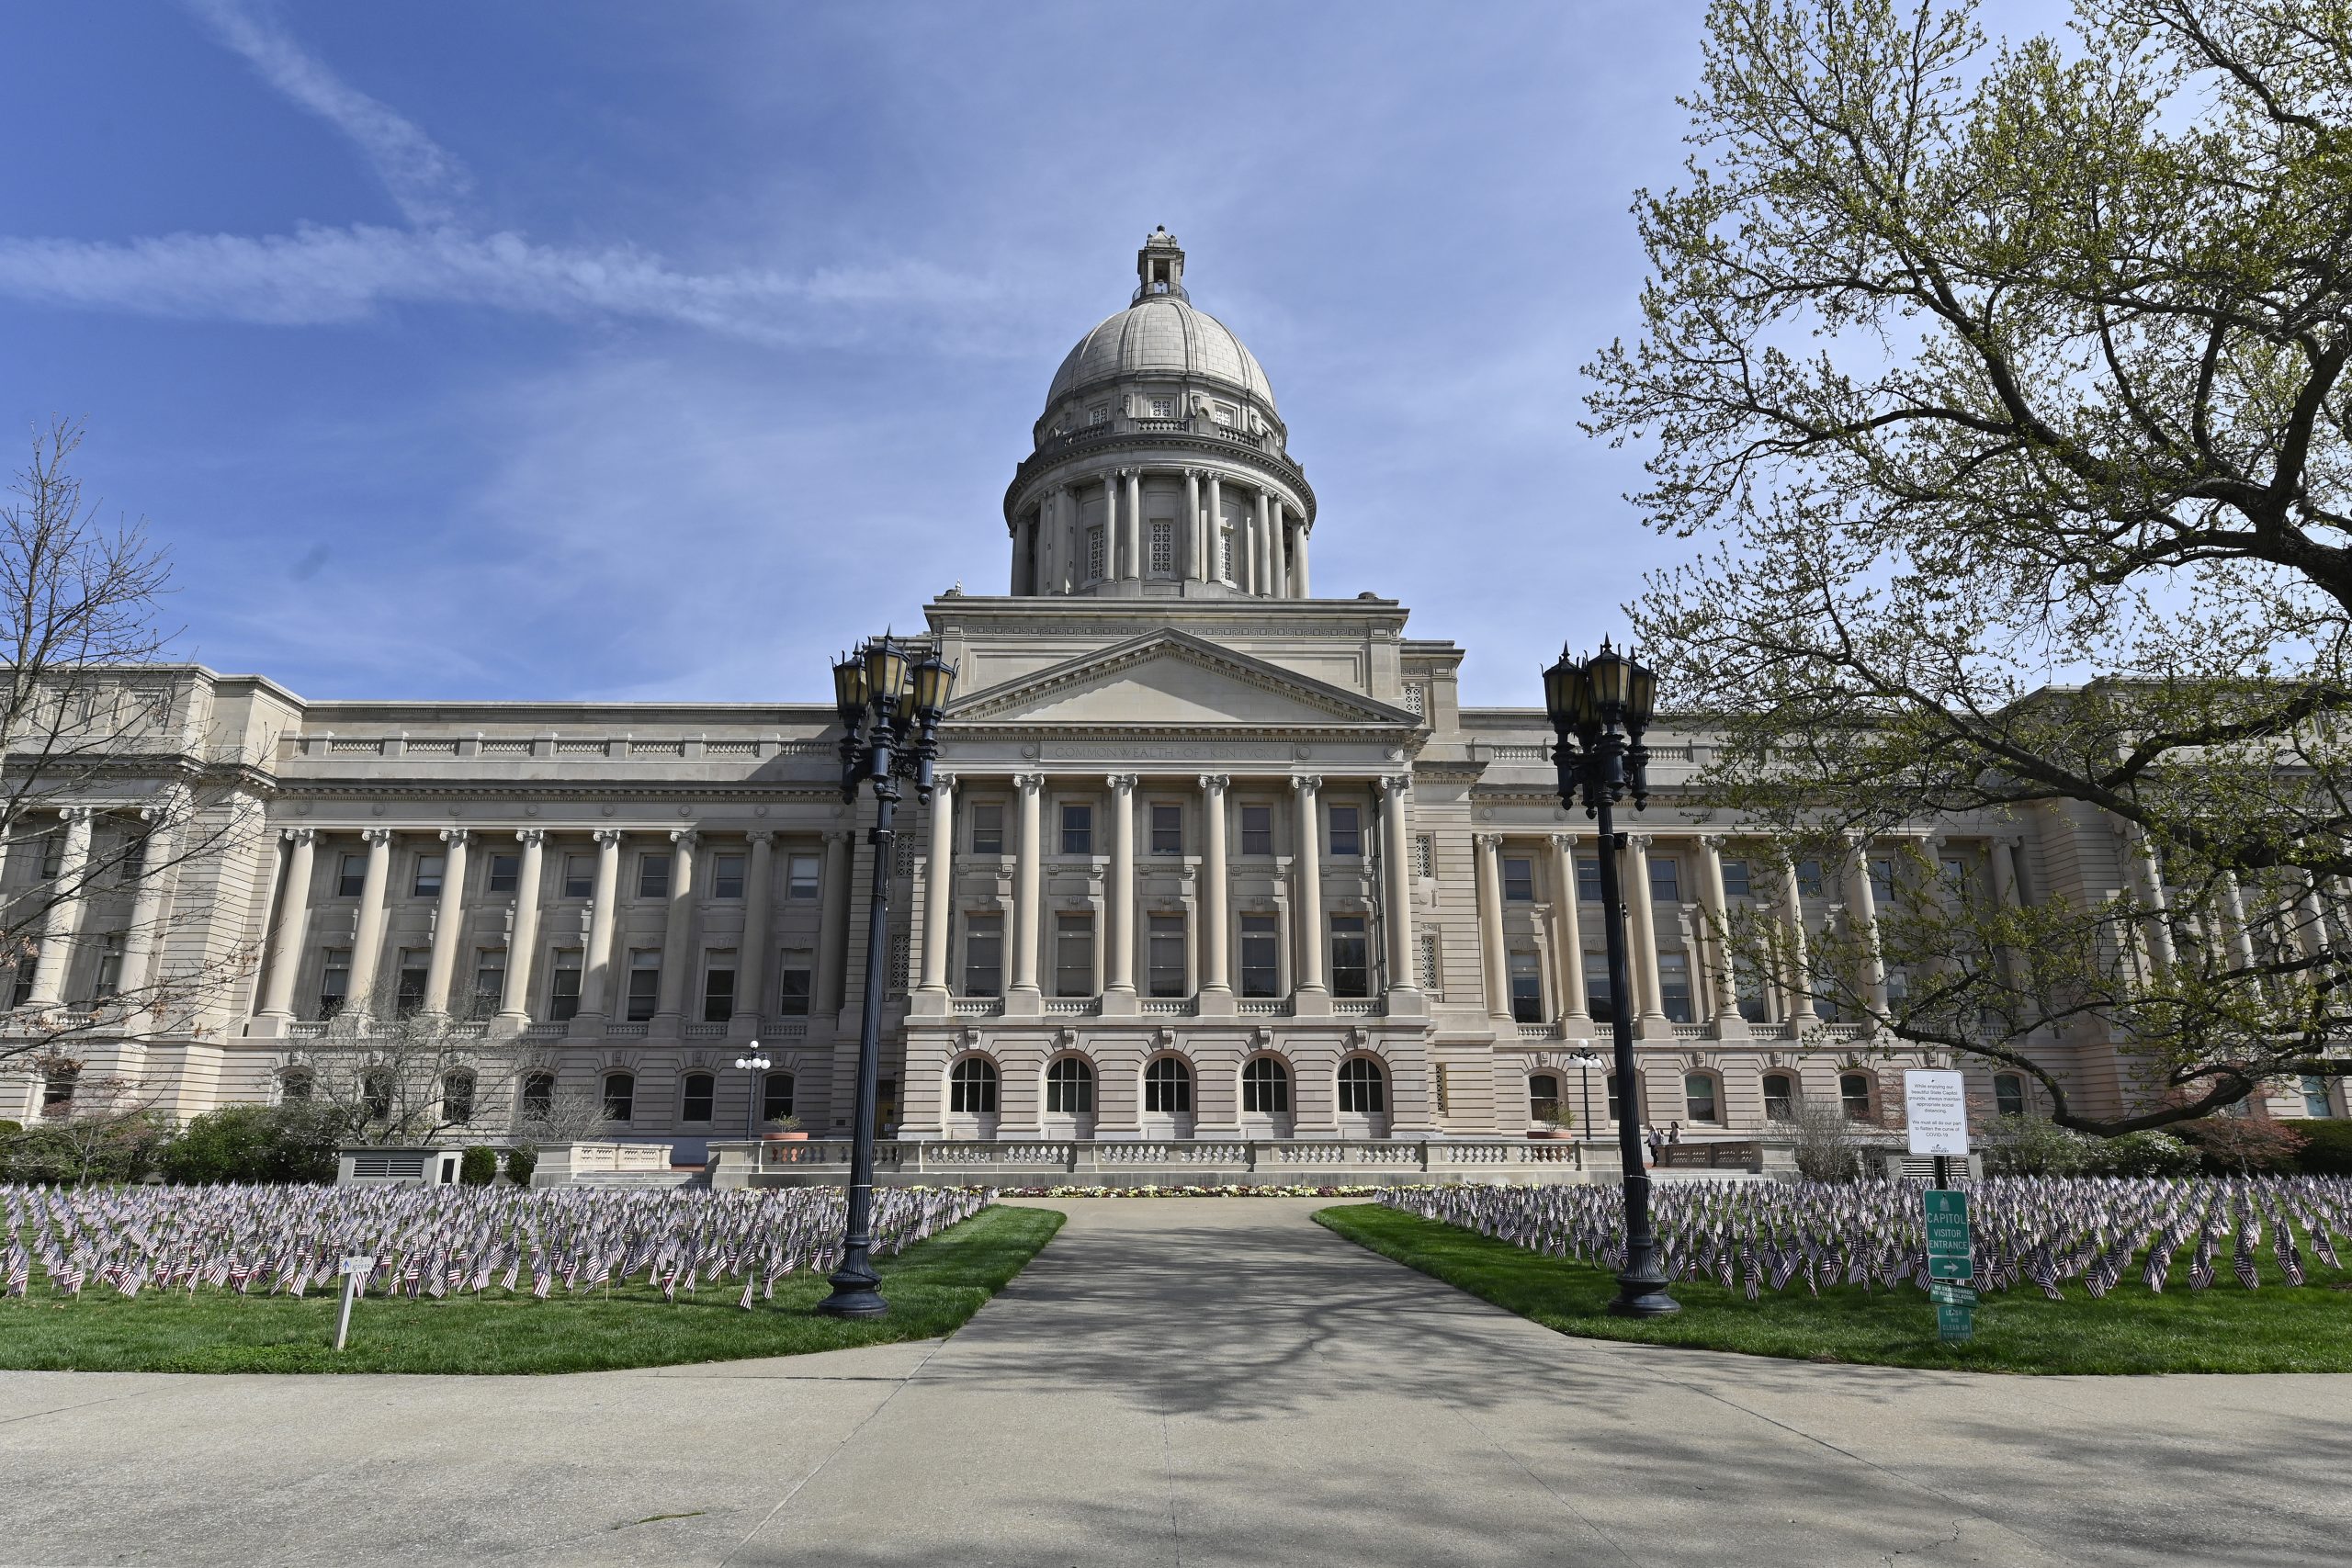 Kentucky Senate Committee Rejects Bills to Relax Child Labor Laws, Cut SNAP Benefits